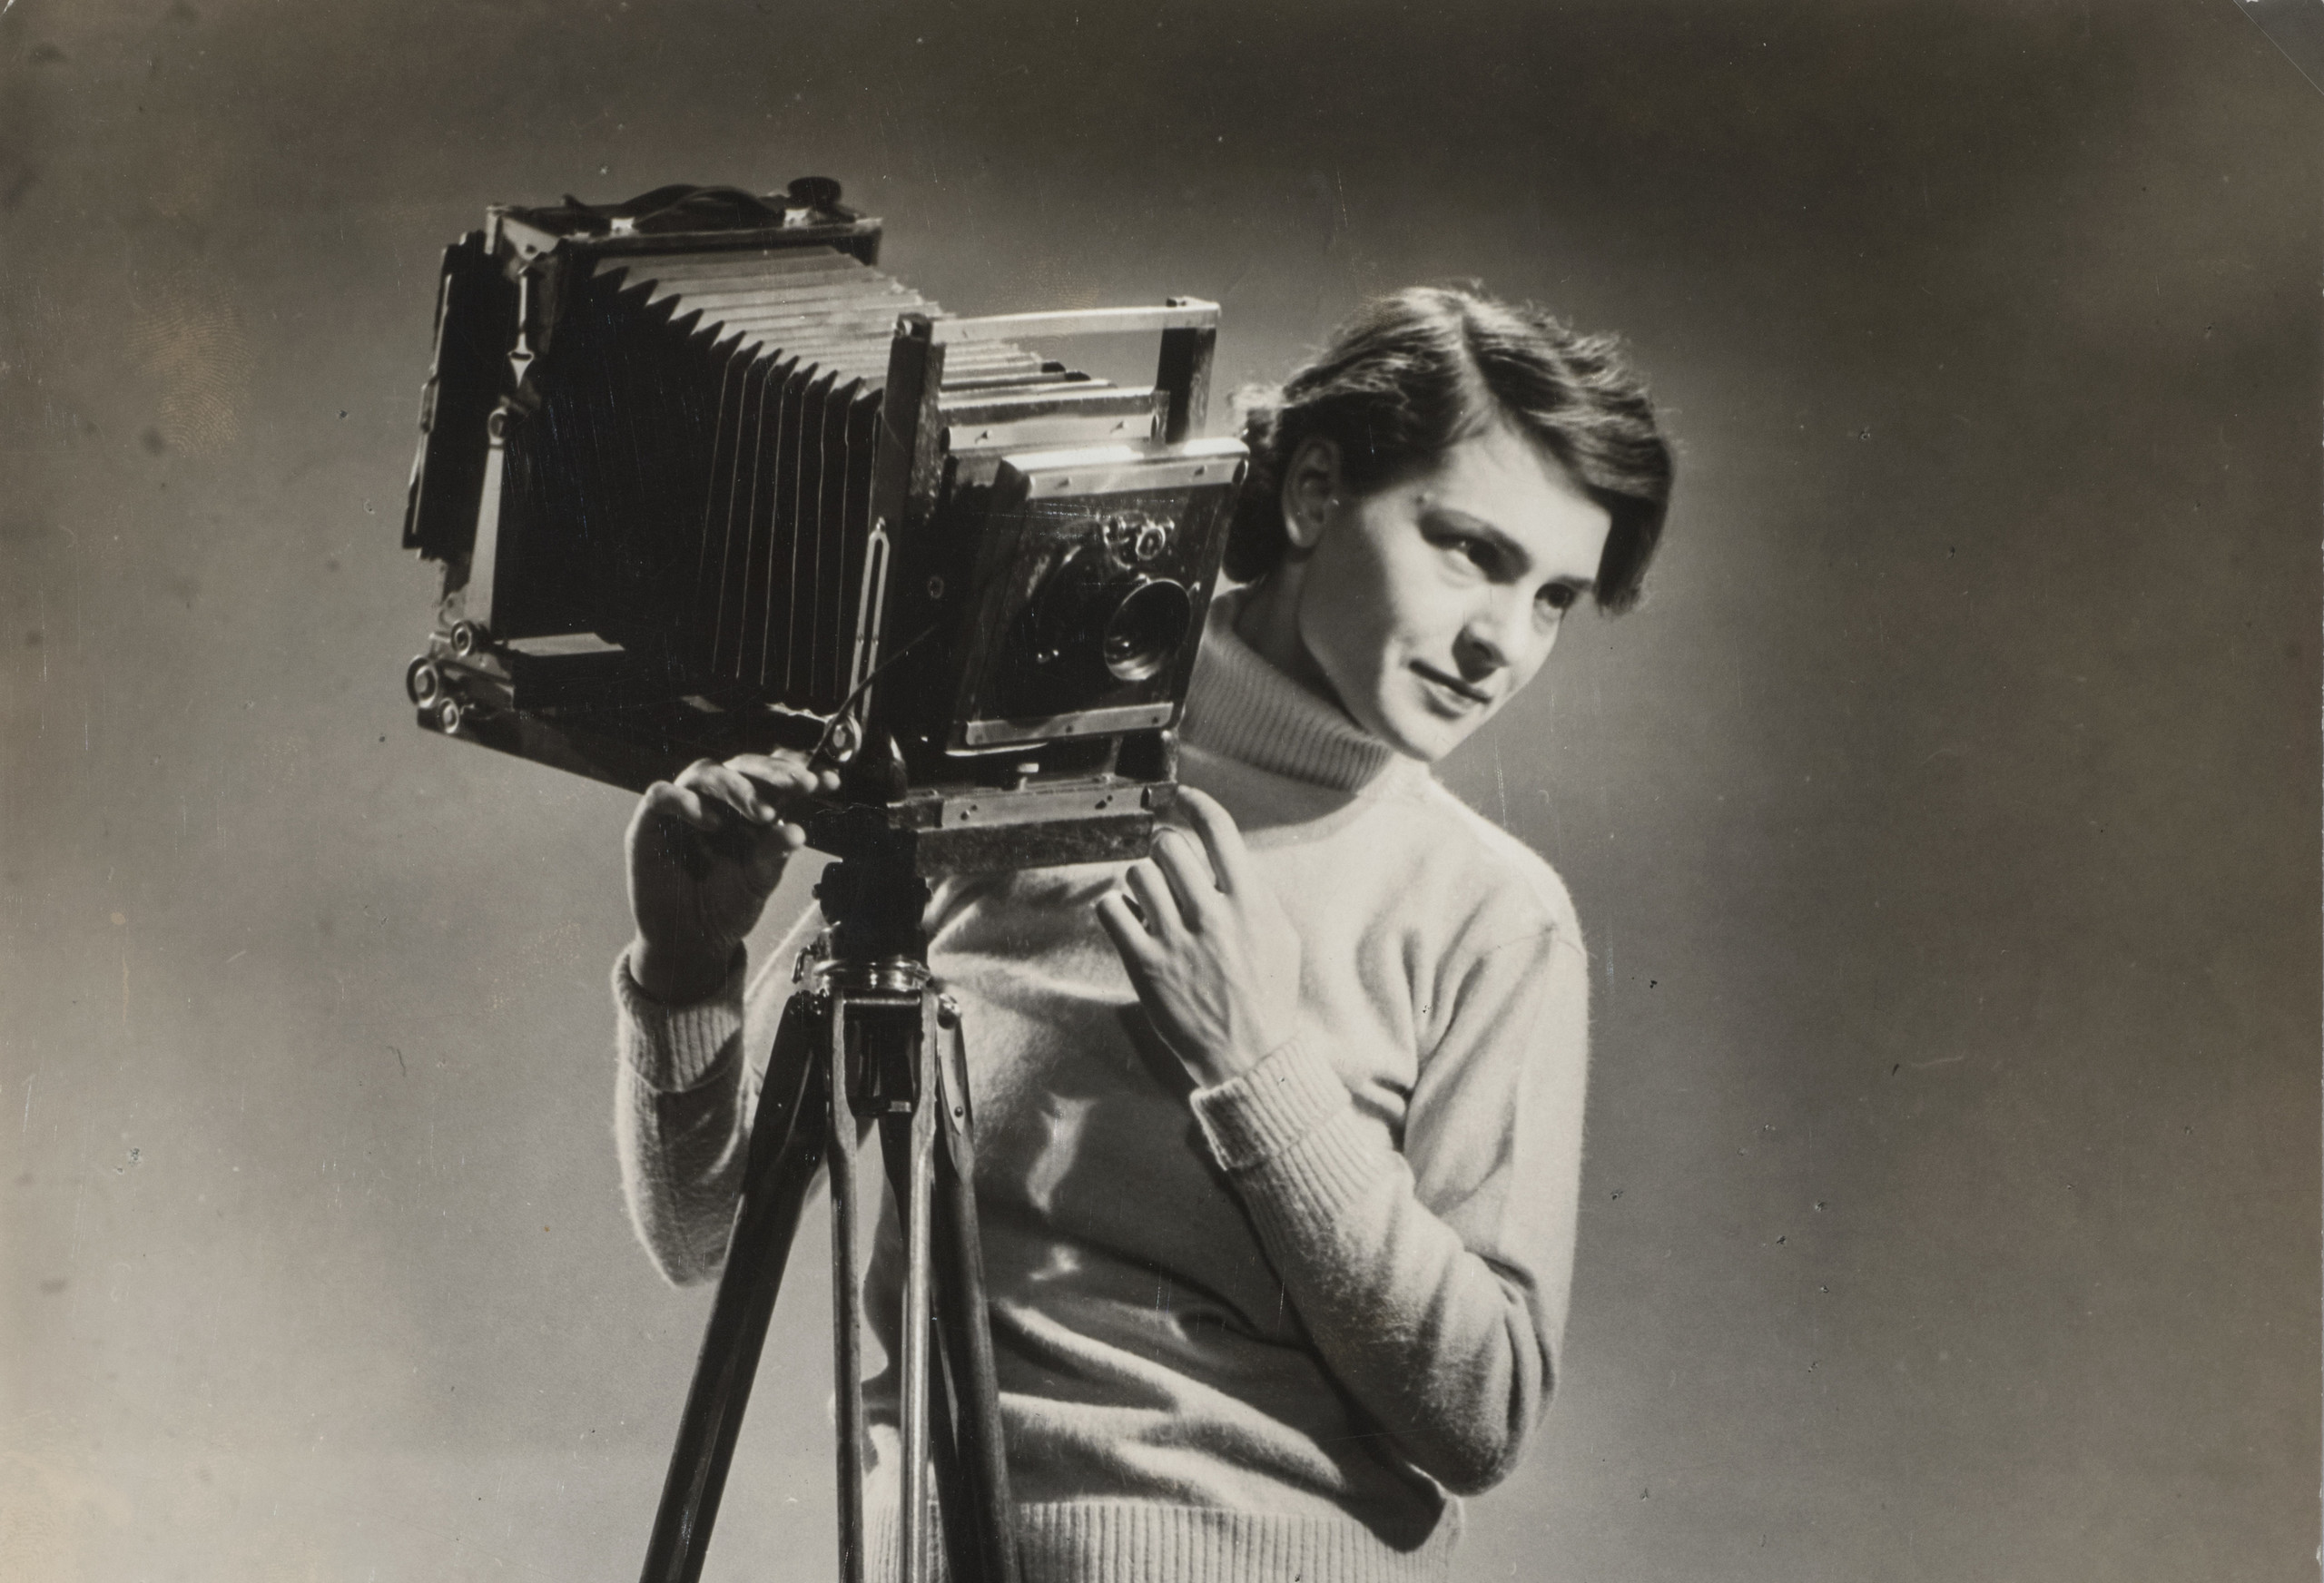 A black-and-white photograph of a light-skinned adult woman standing next to a vintage camera mounted on legs.